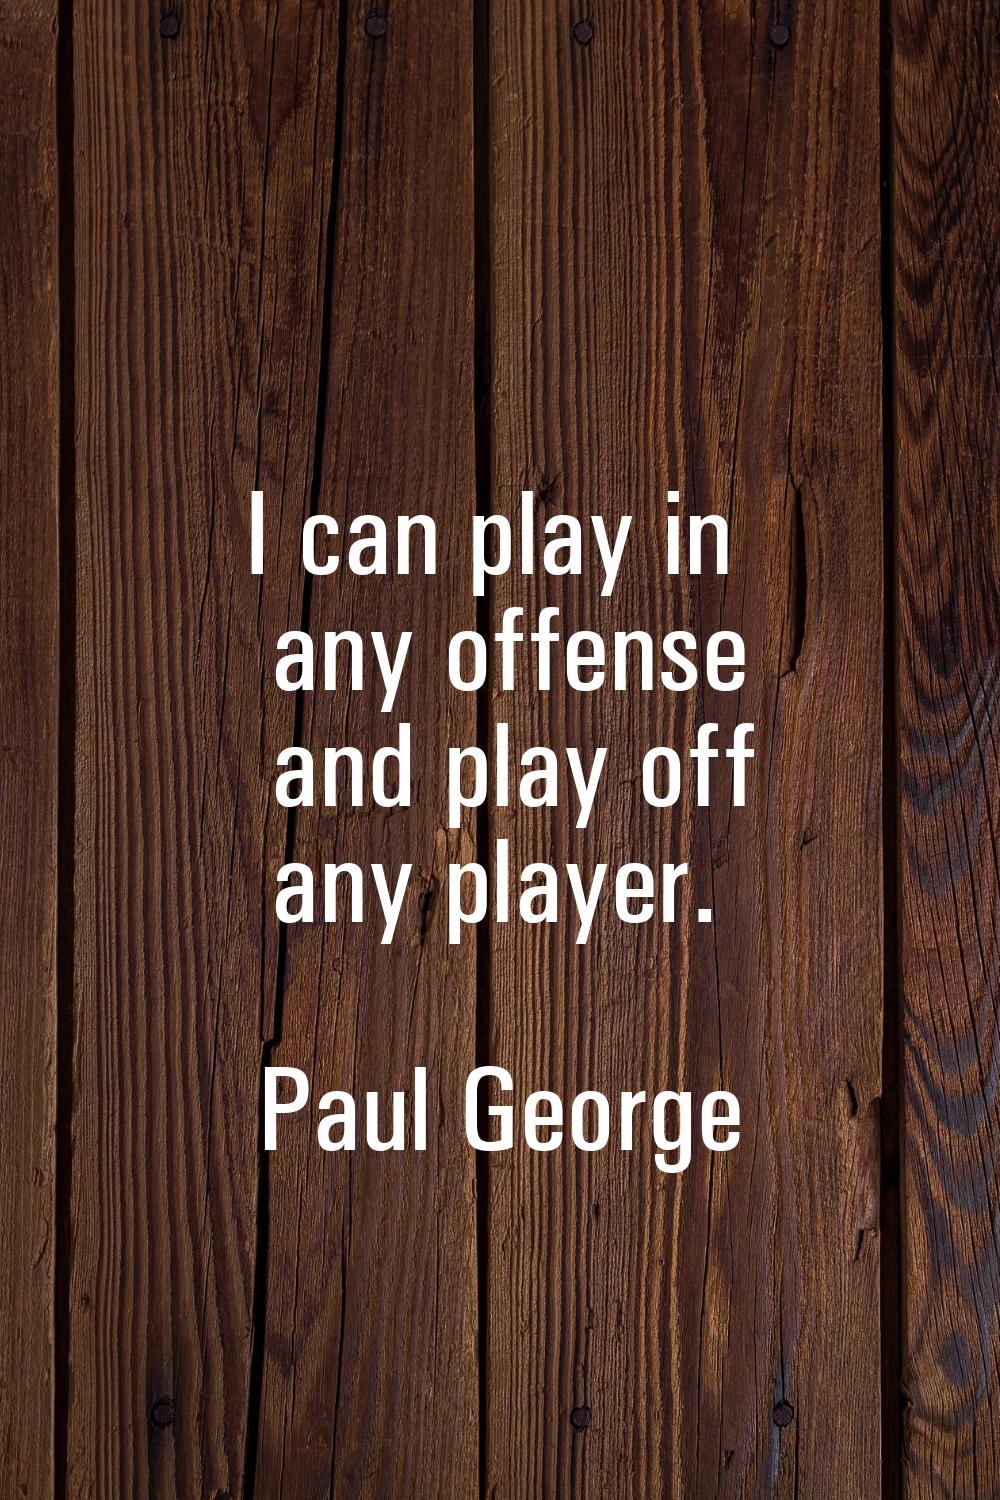 I can play in any offense and play off any player.